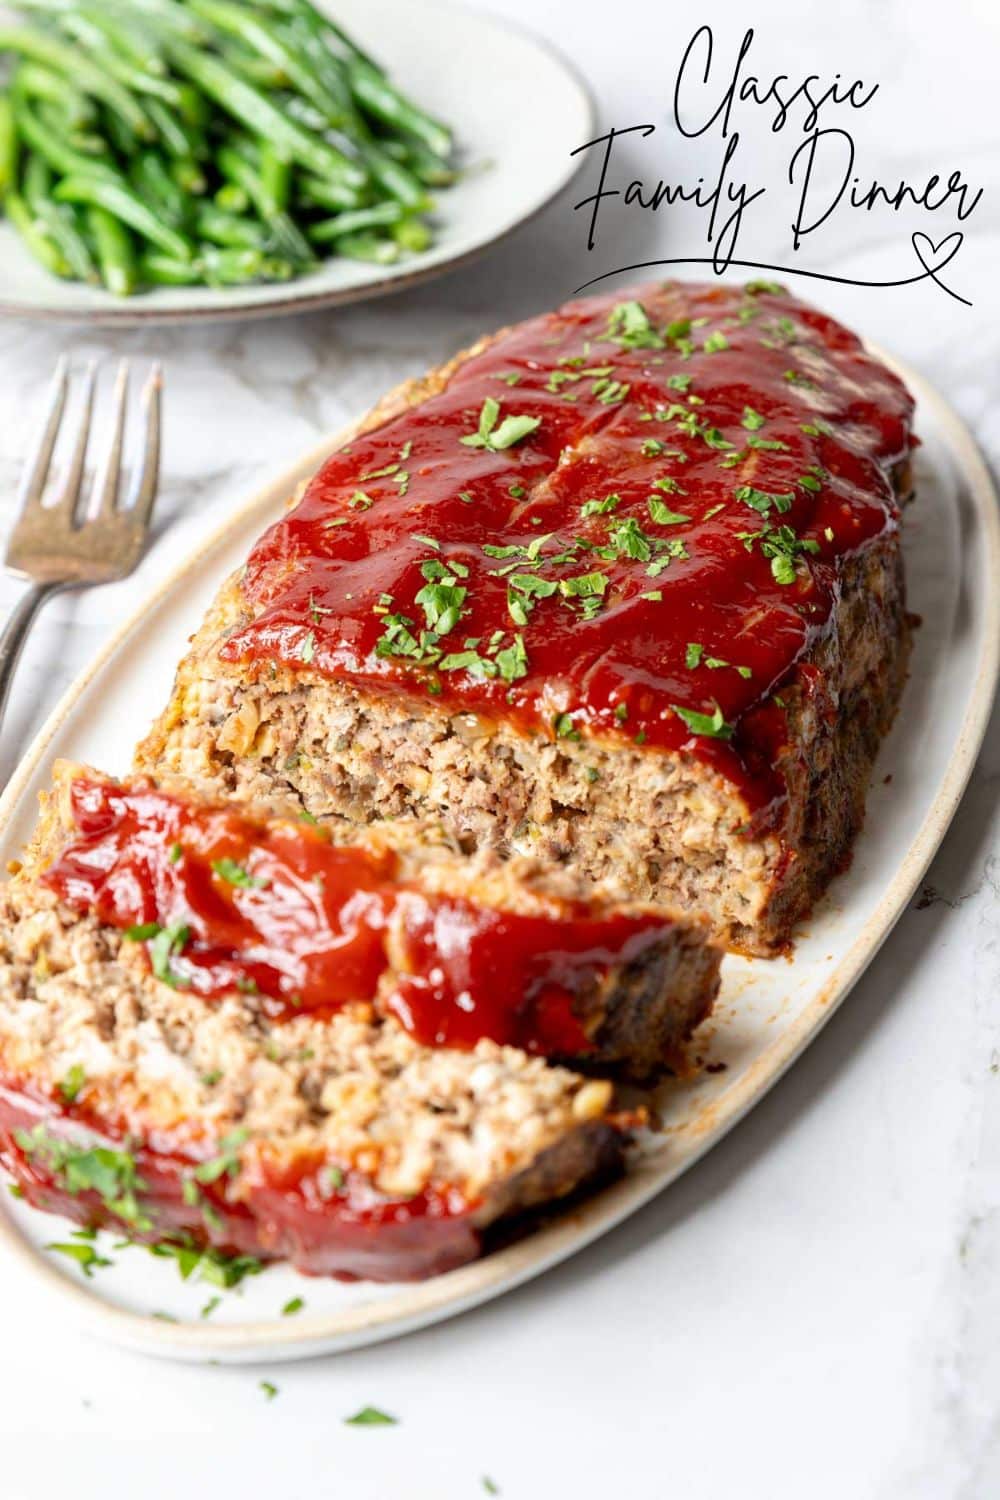 meatloaf image with text overlay for Pinterest